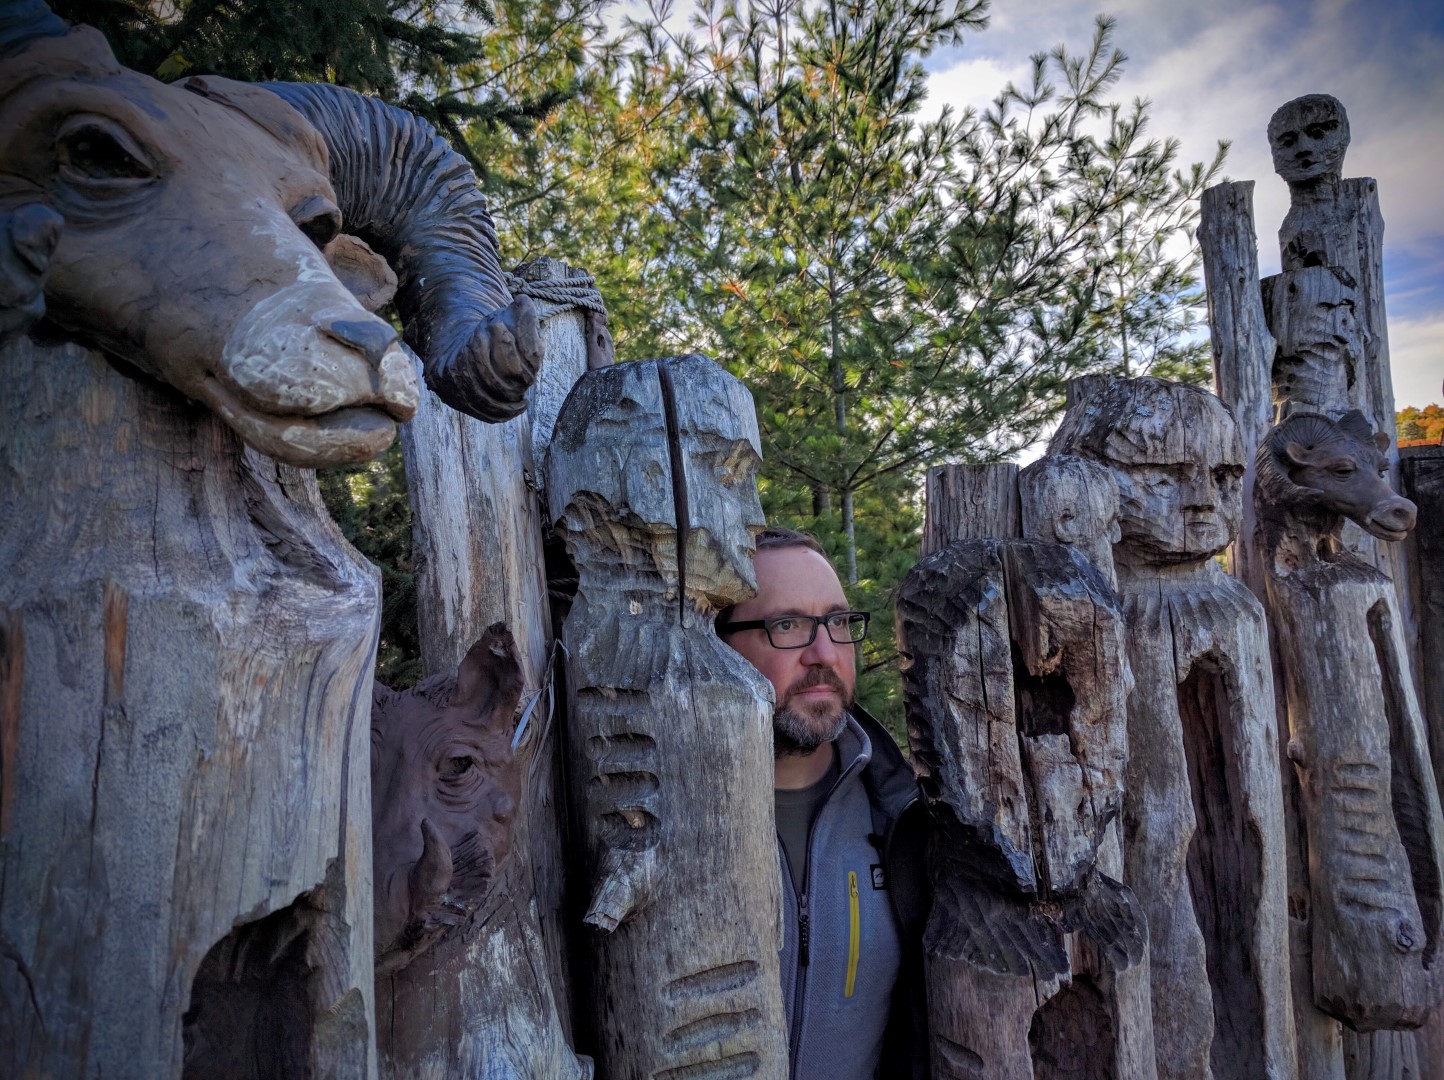 Greg with Vermont Art Statues